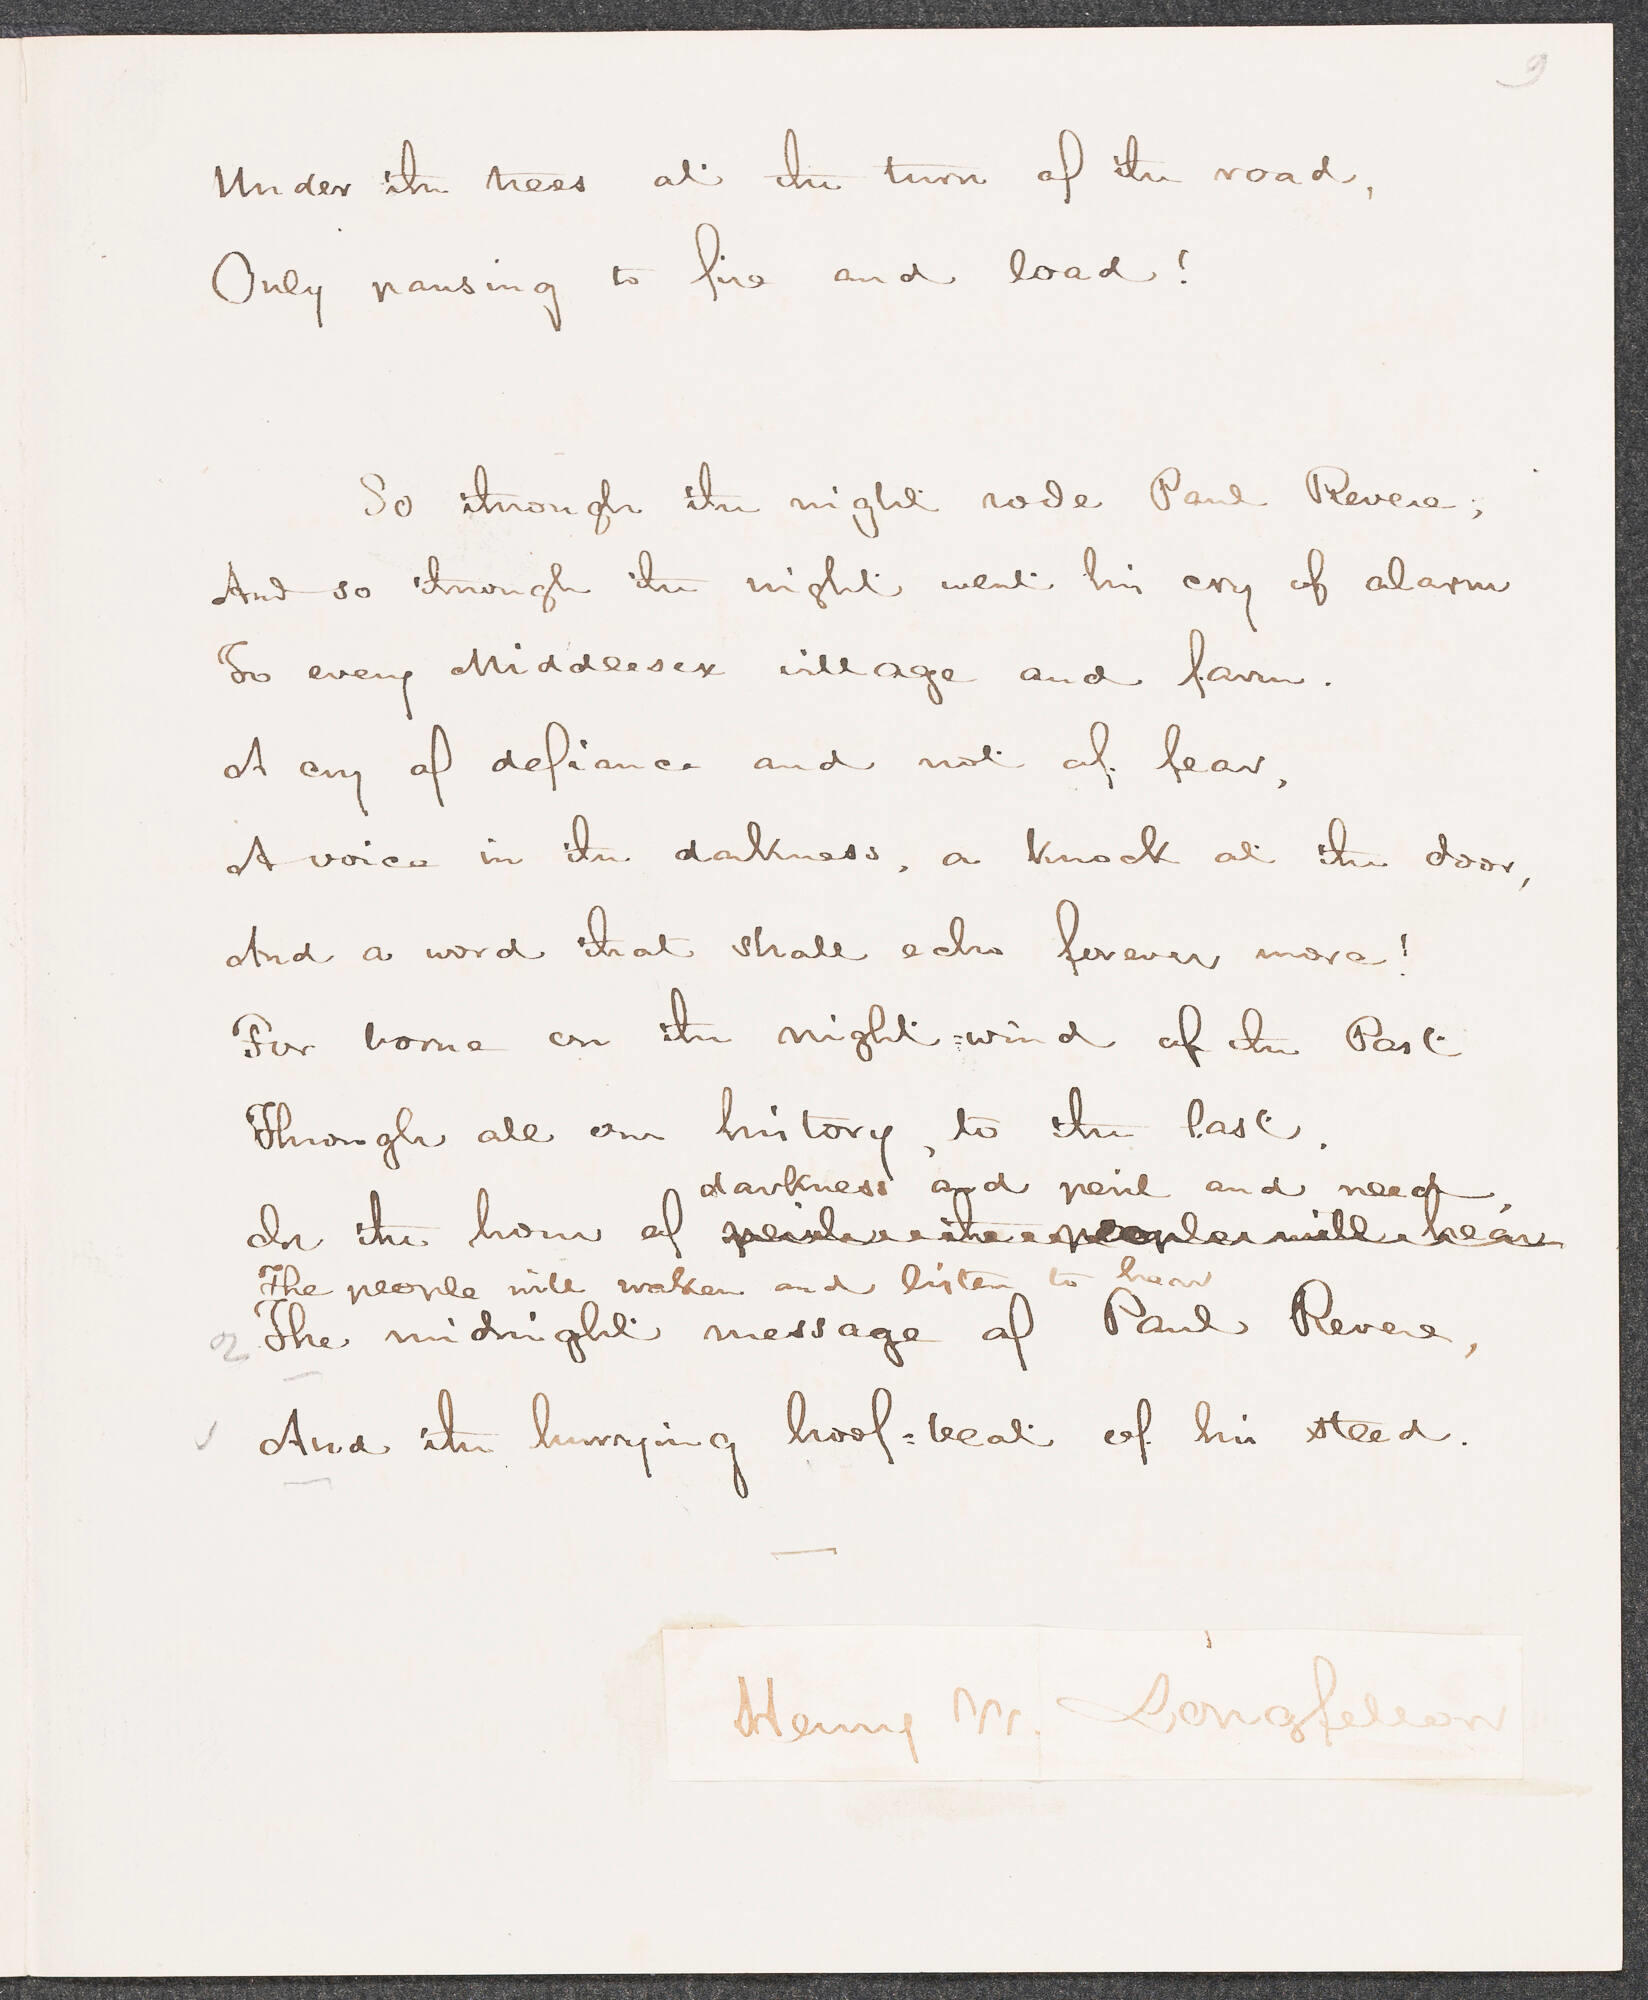 The last page of Gardner's manuscript of Longfellow’s poem “Paul Revere’s Ride” with edits.